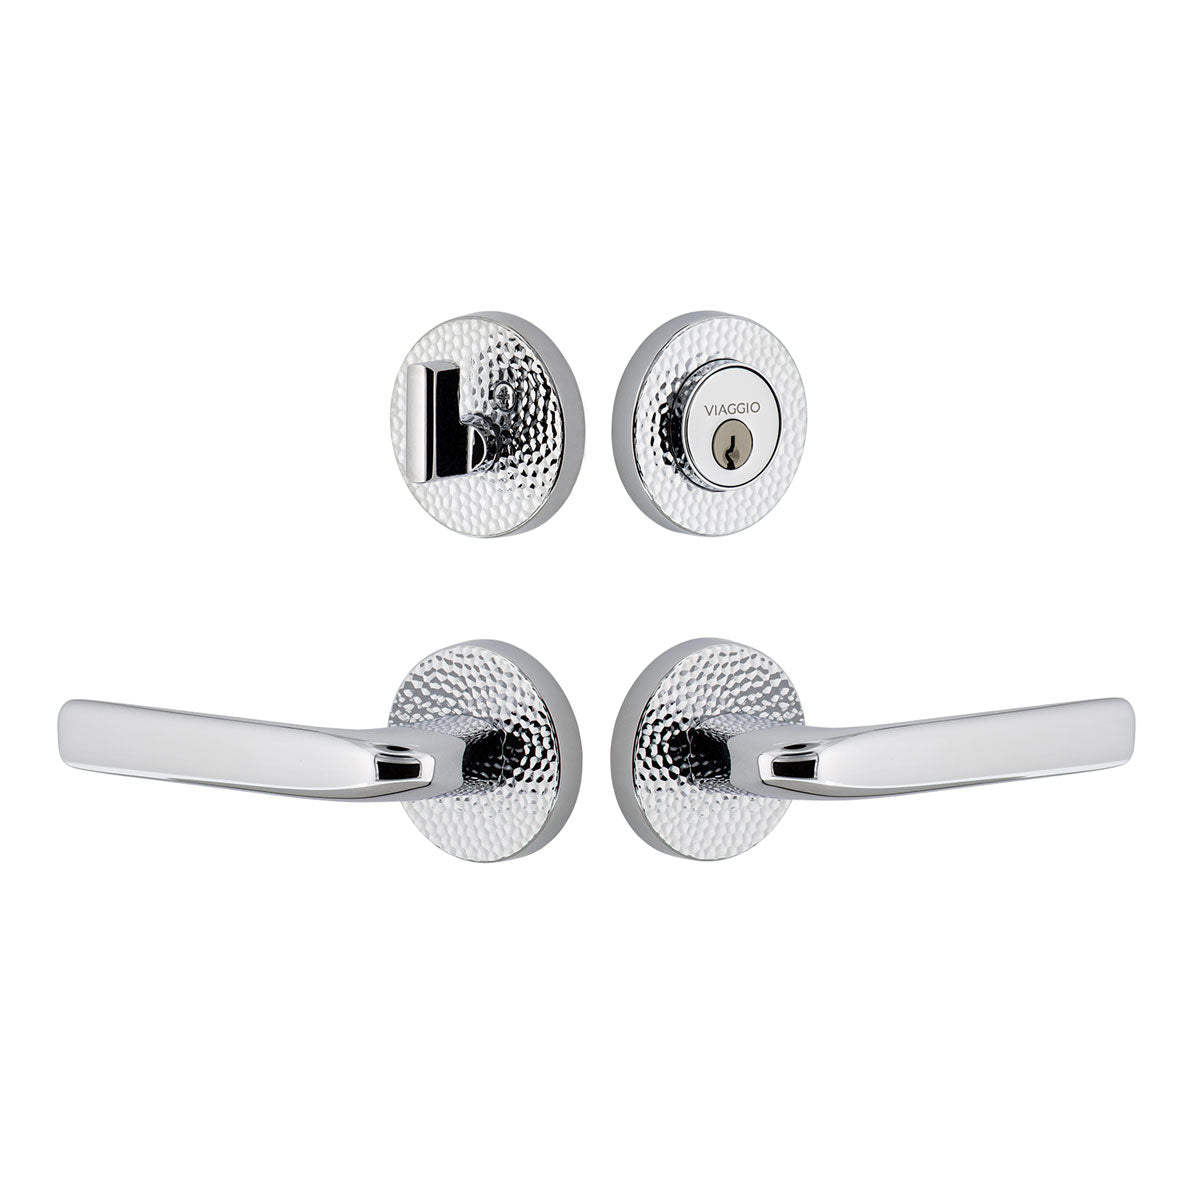 Circolo Hammered Rosette Entry Set with Bella Lever in Bright Chrome